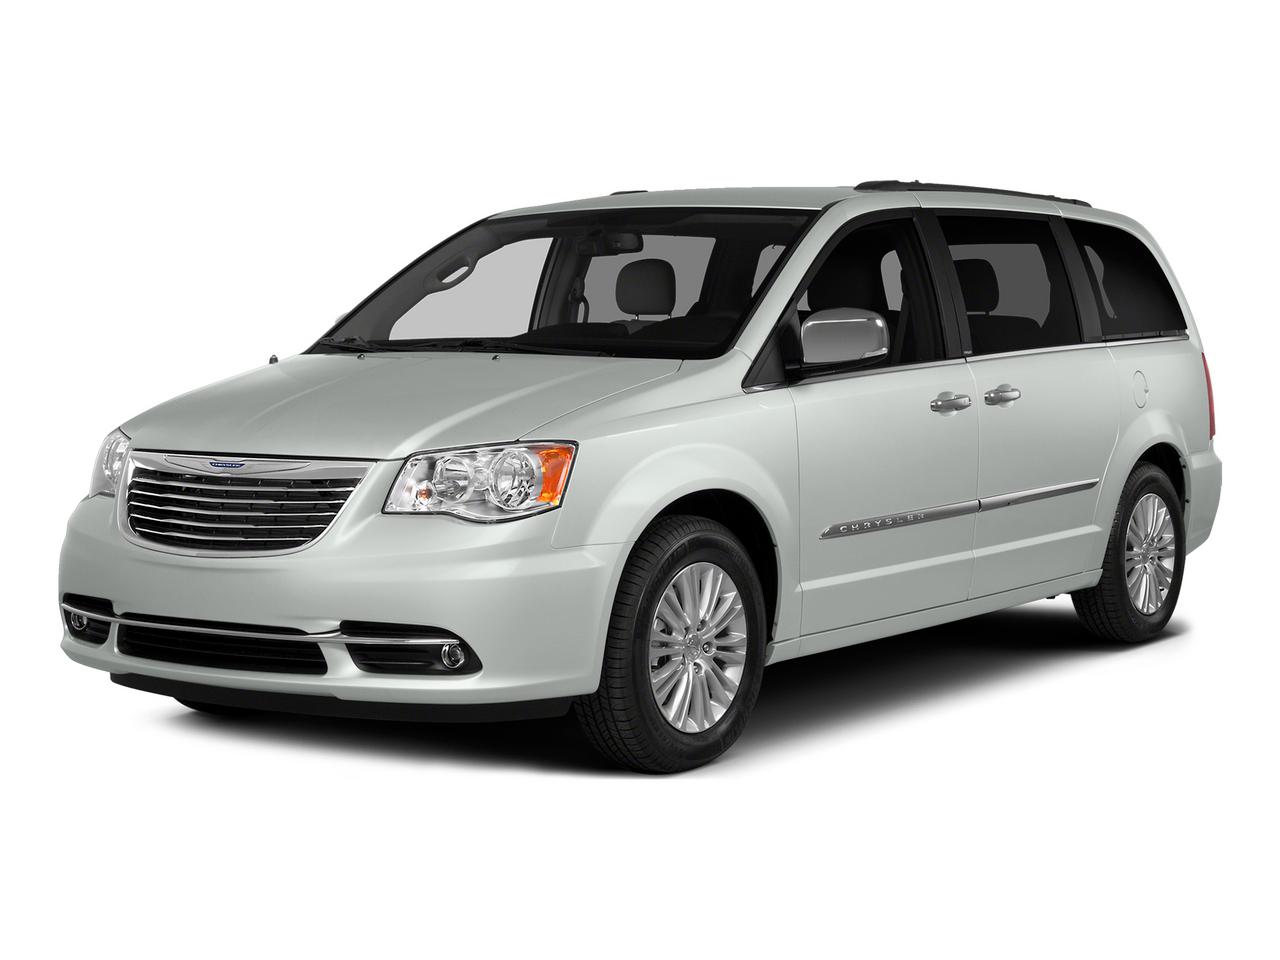 2015 Chrysler Town & Country Vehicle Photo in GRAND BLANC, MI 48439-8139